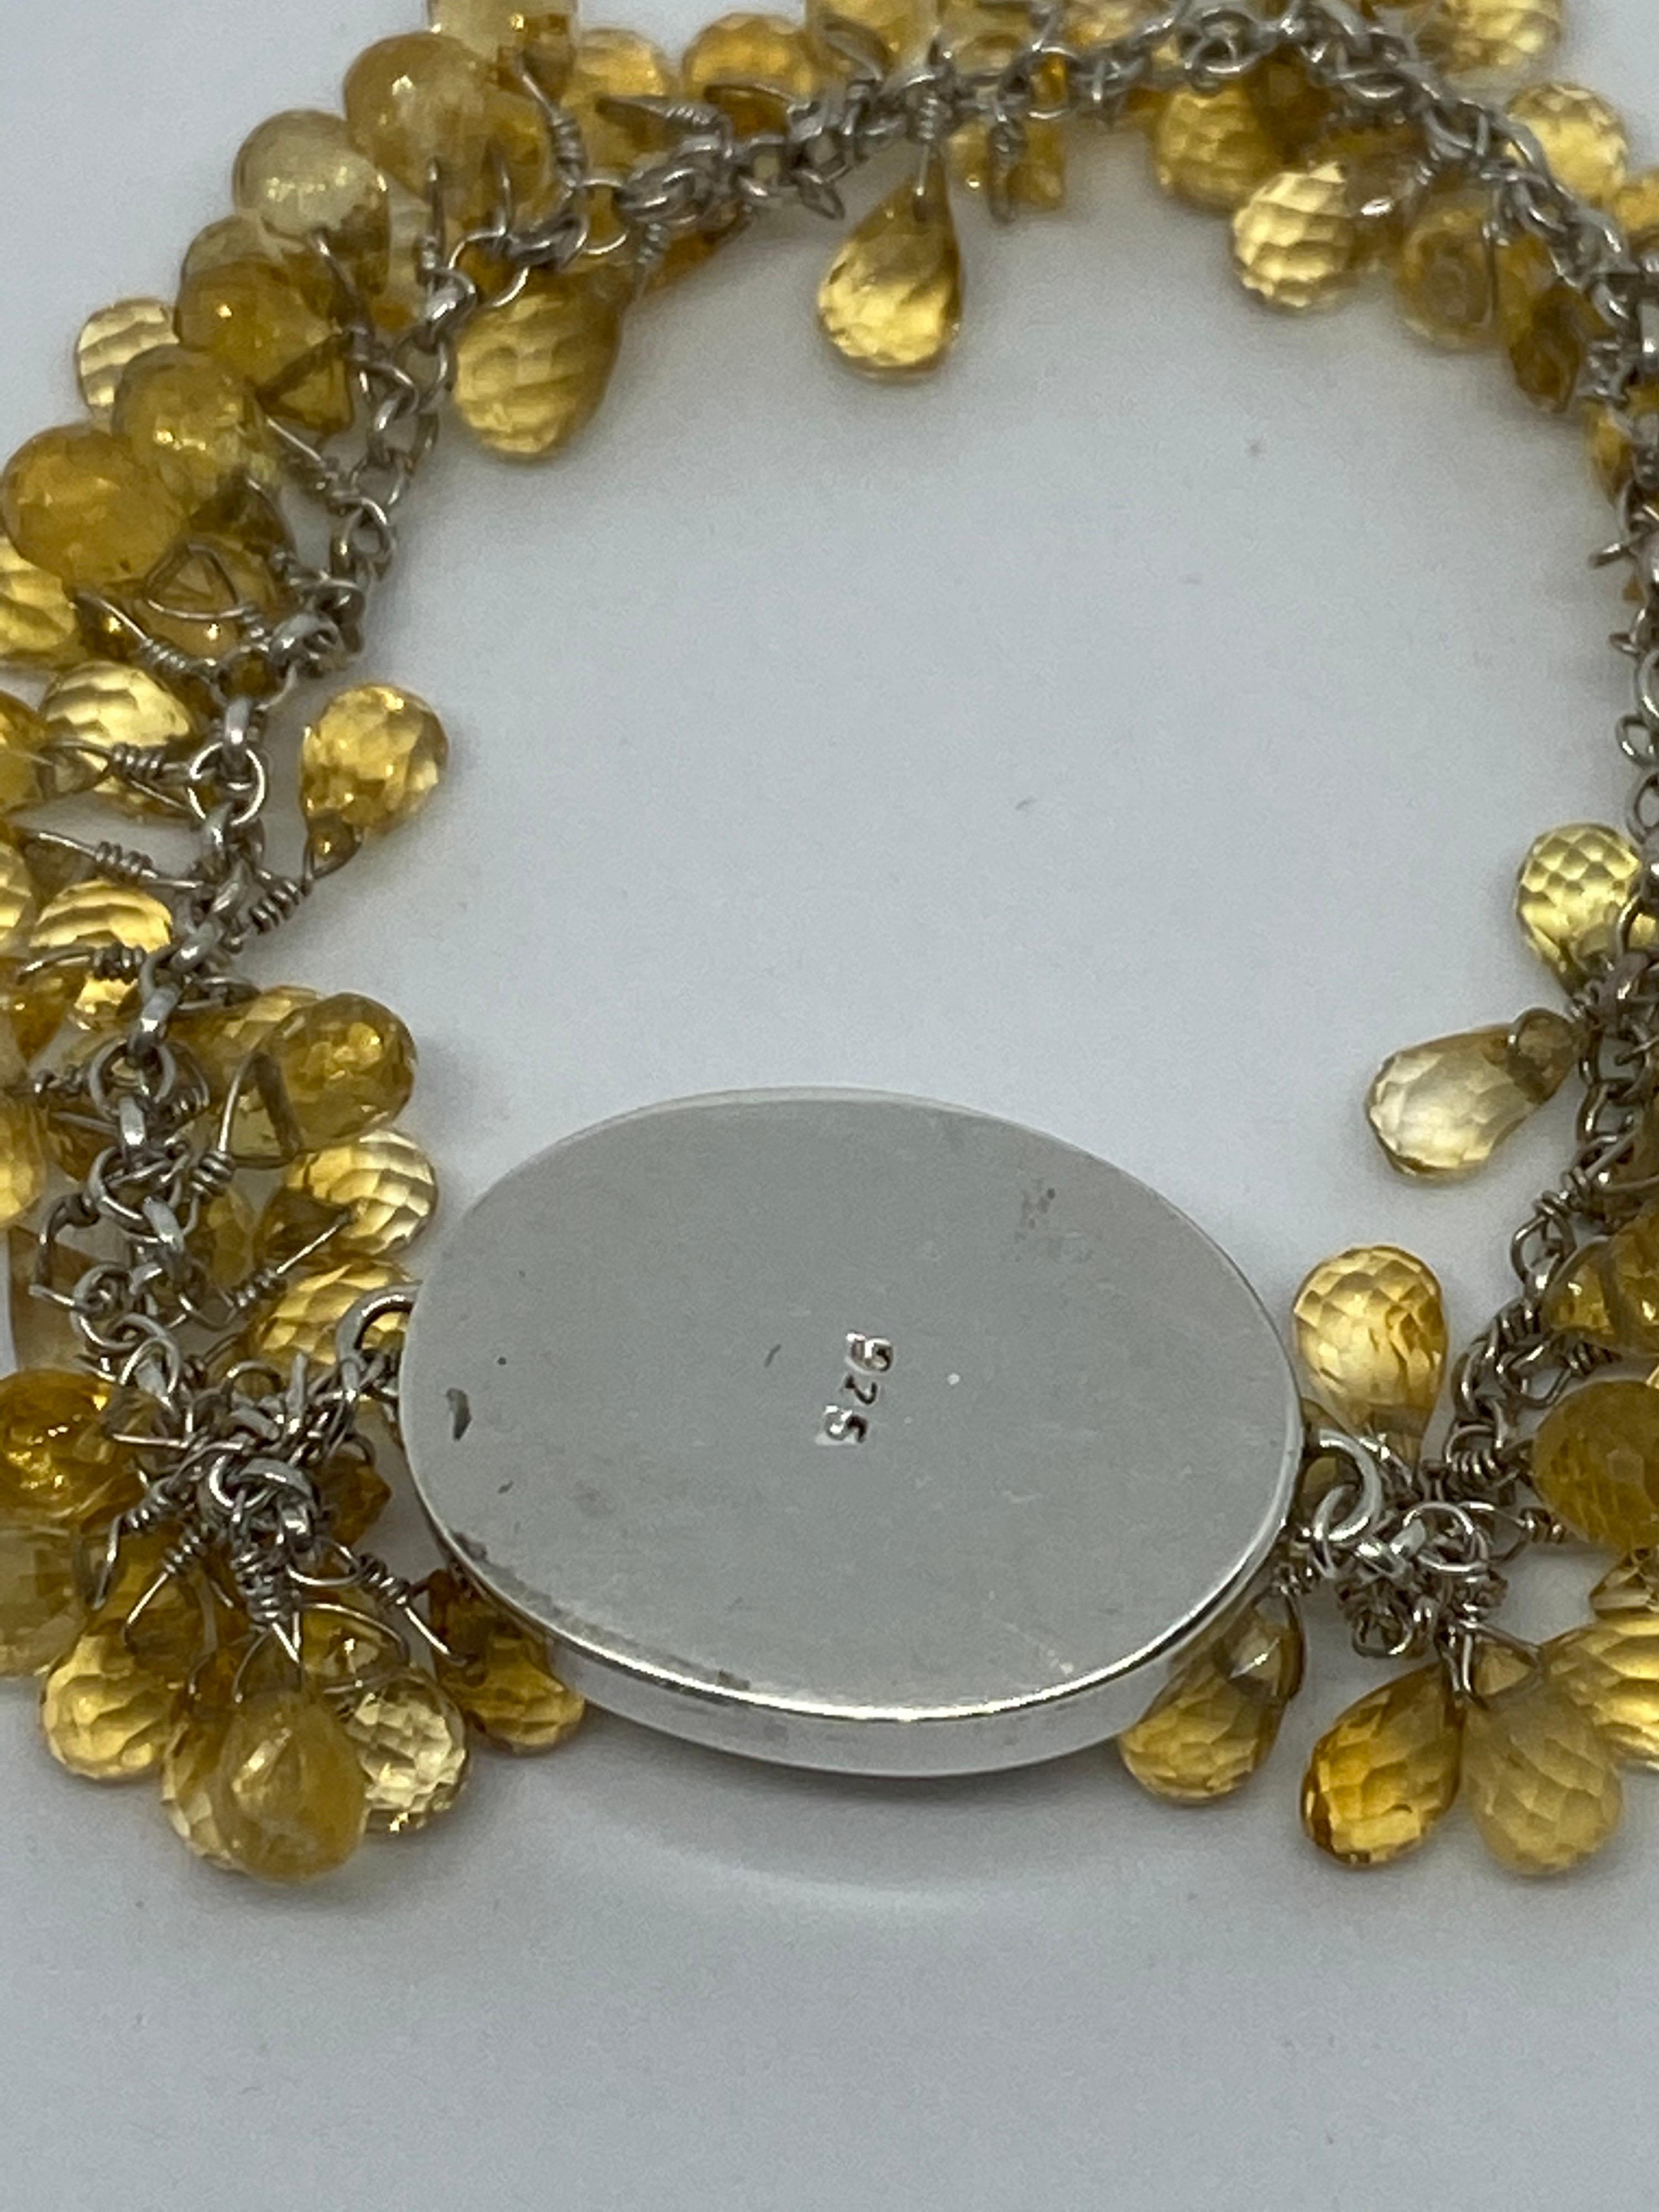 This bracelet fully extended measures 8 inches in length and is adorned with beautifully clean and clear Citrine Briolettes that are all hand wire wrapped into the bracelet for a dangling effect. The Center Large Oval Citrine is Approx 15.5 x 9.6mm